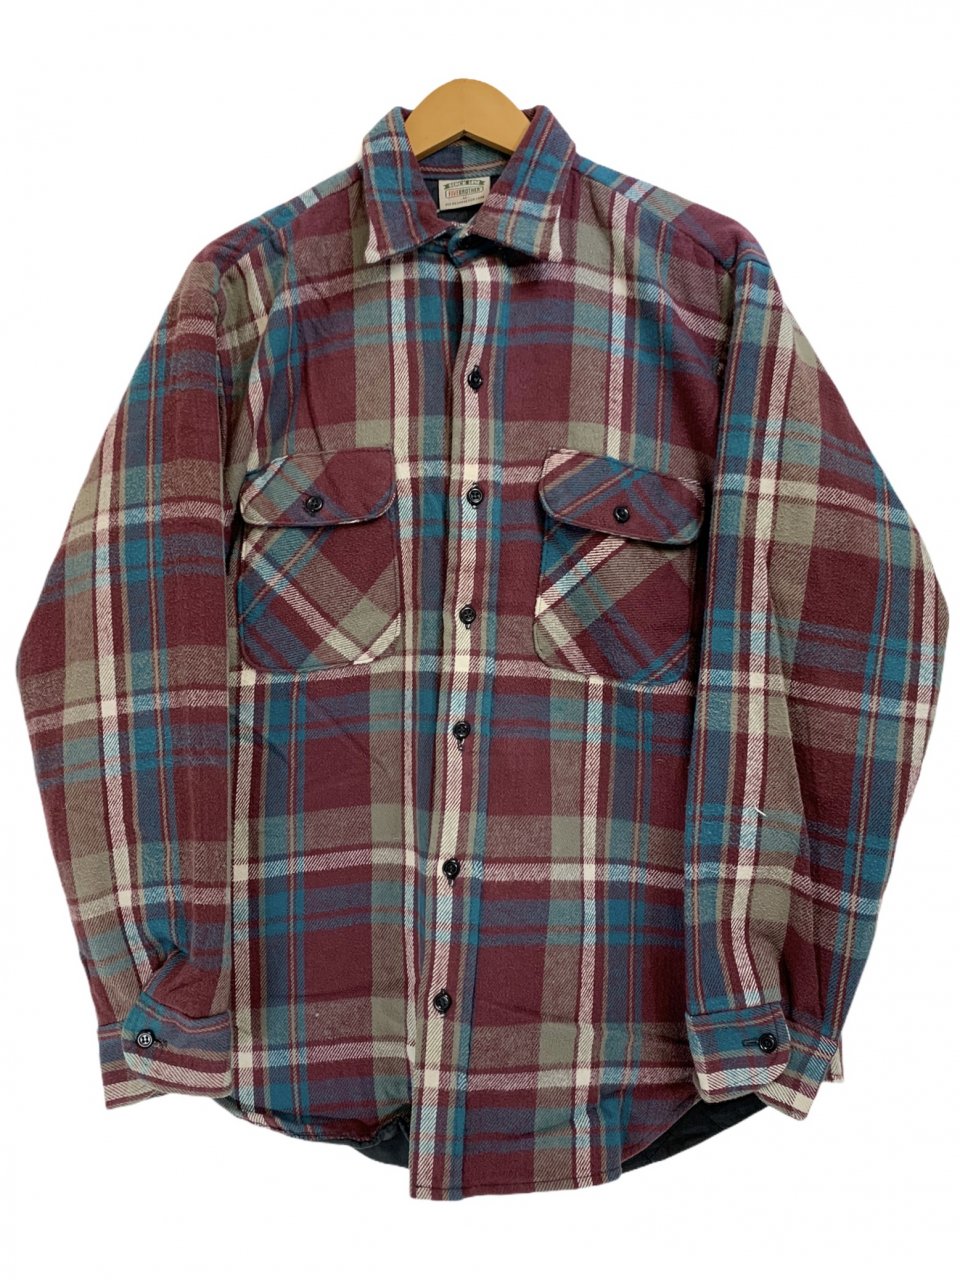 90s FIVE BROTHER Quilting Lined Flannel L/S Shirt エンジ M